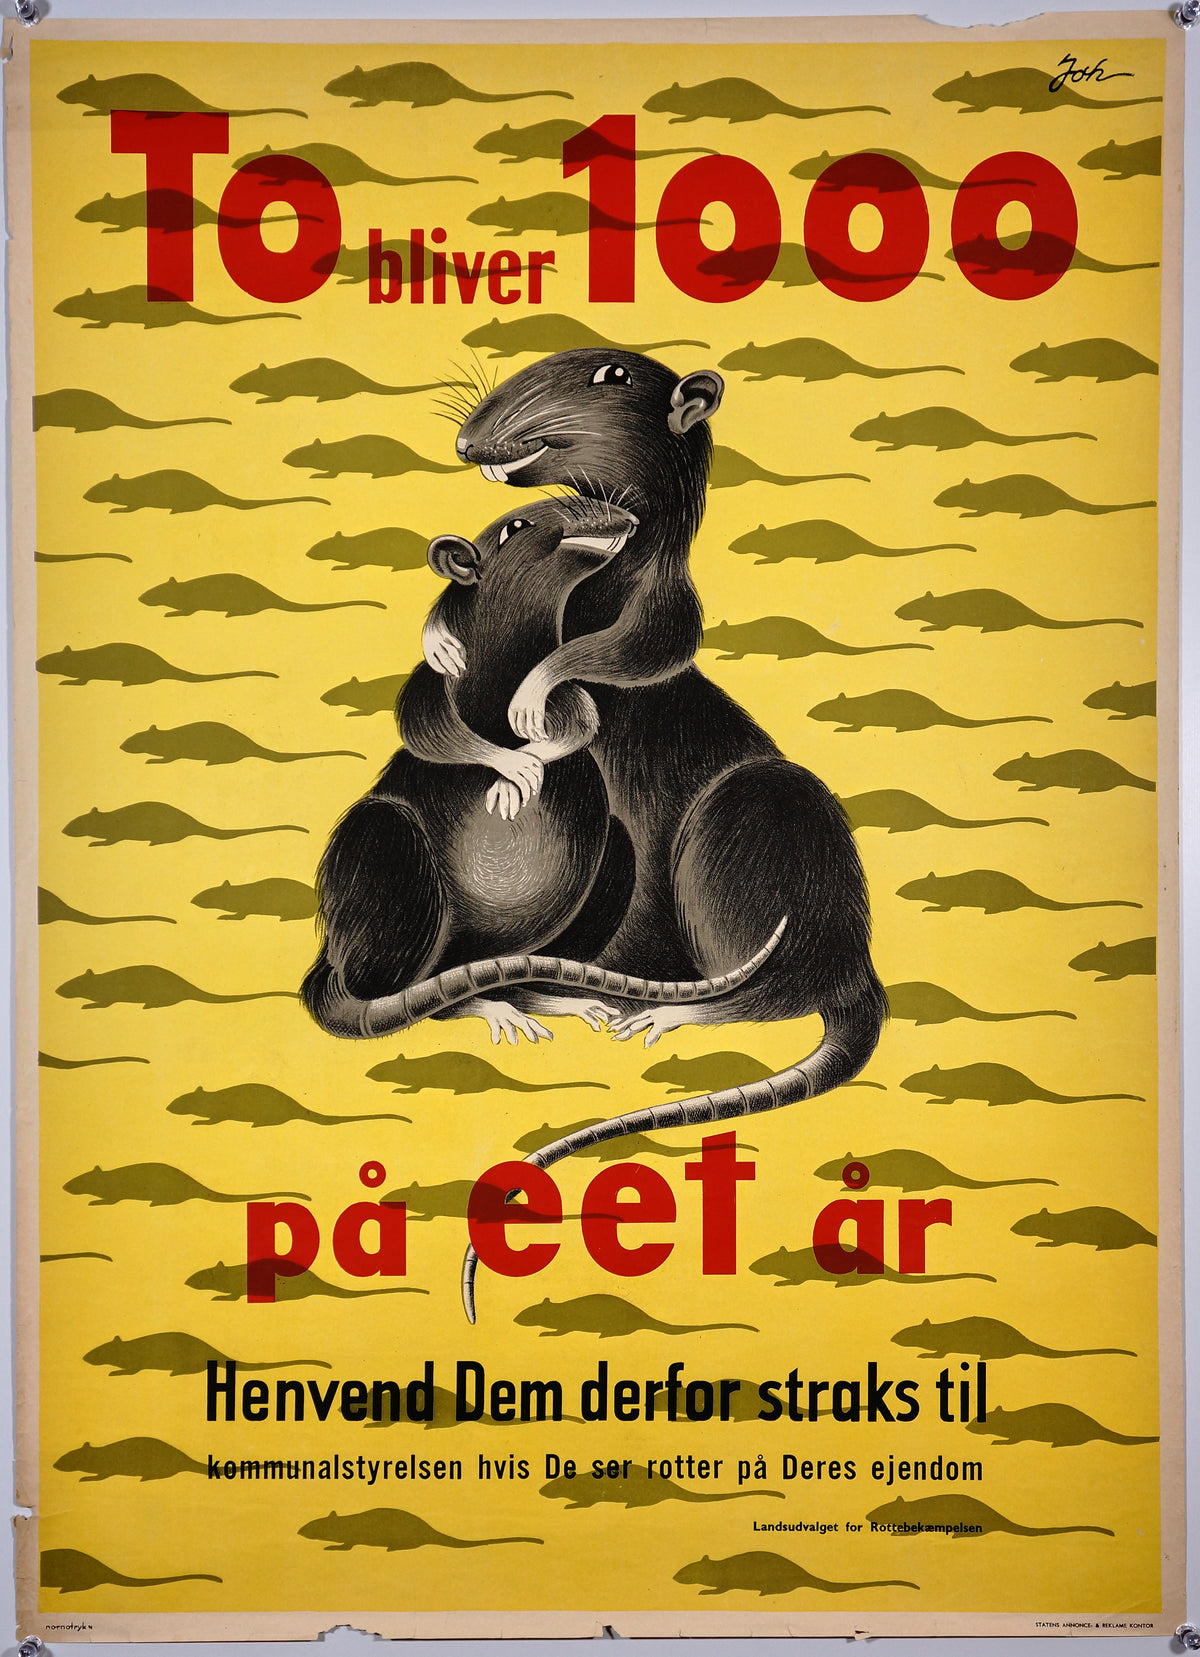 Rats! To Bliver 1000 pa Eet Ar - Authentic Vintage Poster